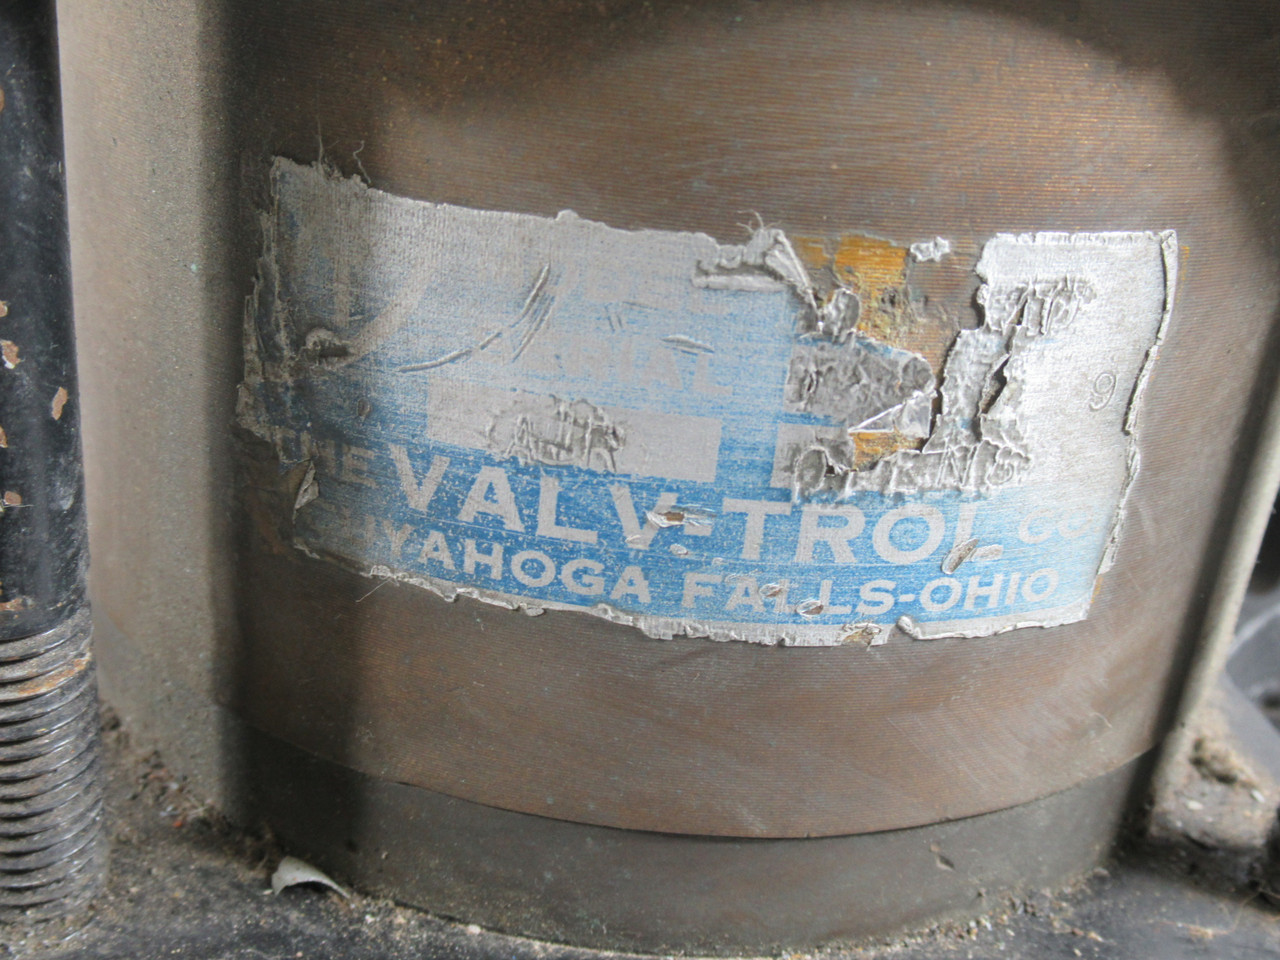 Valv-Trol D-1164 Pilot Operated Check Valve 2" 1500 psi USED